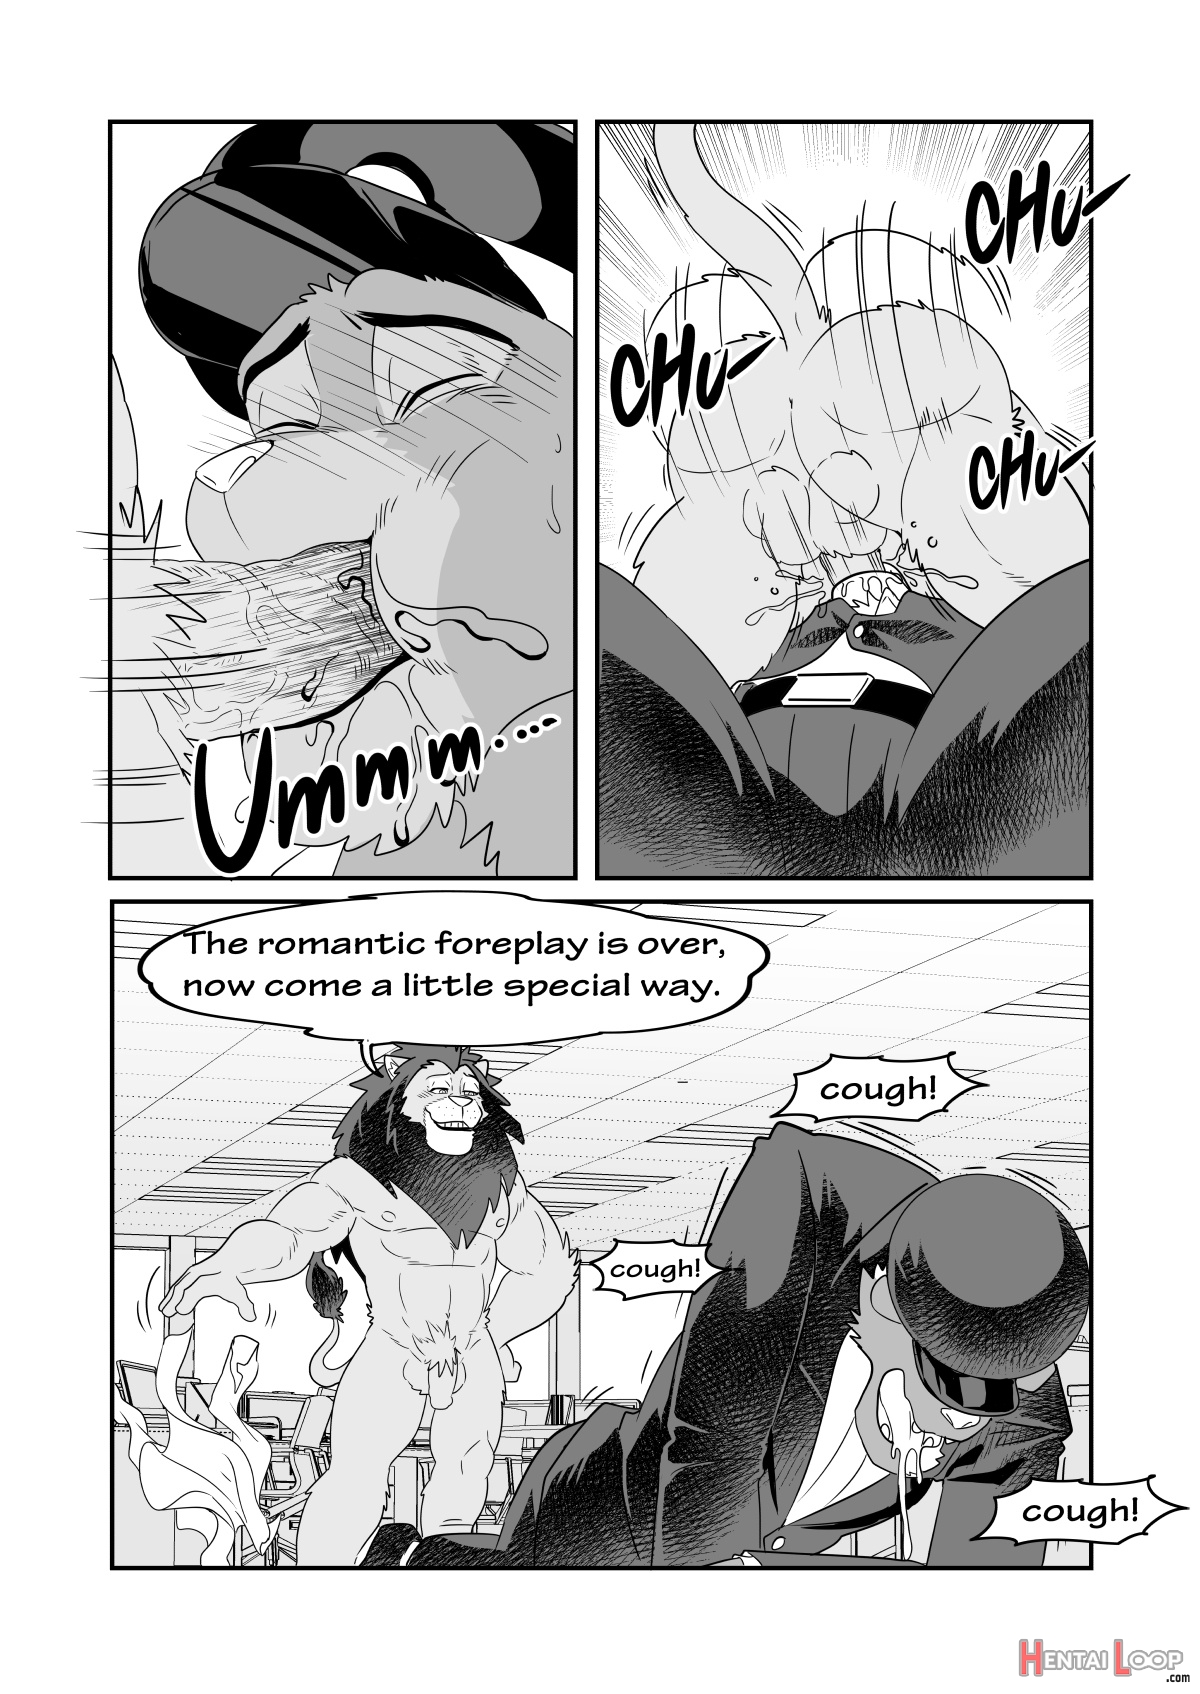 Chief Bogo Found A Dirty Police page 26